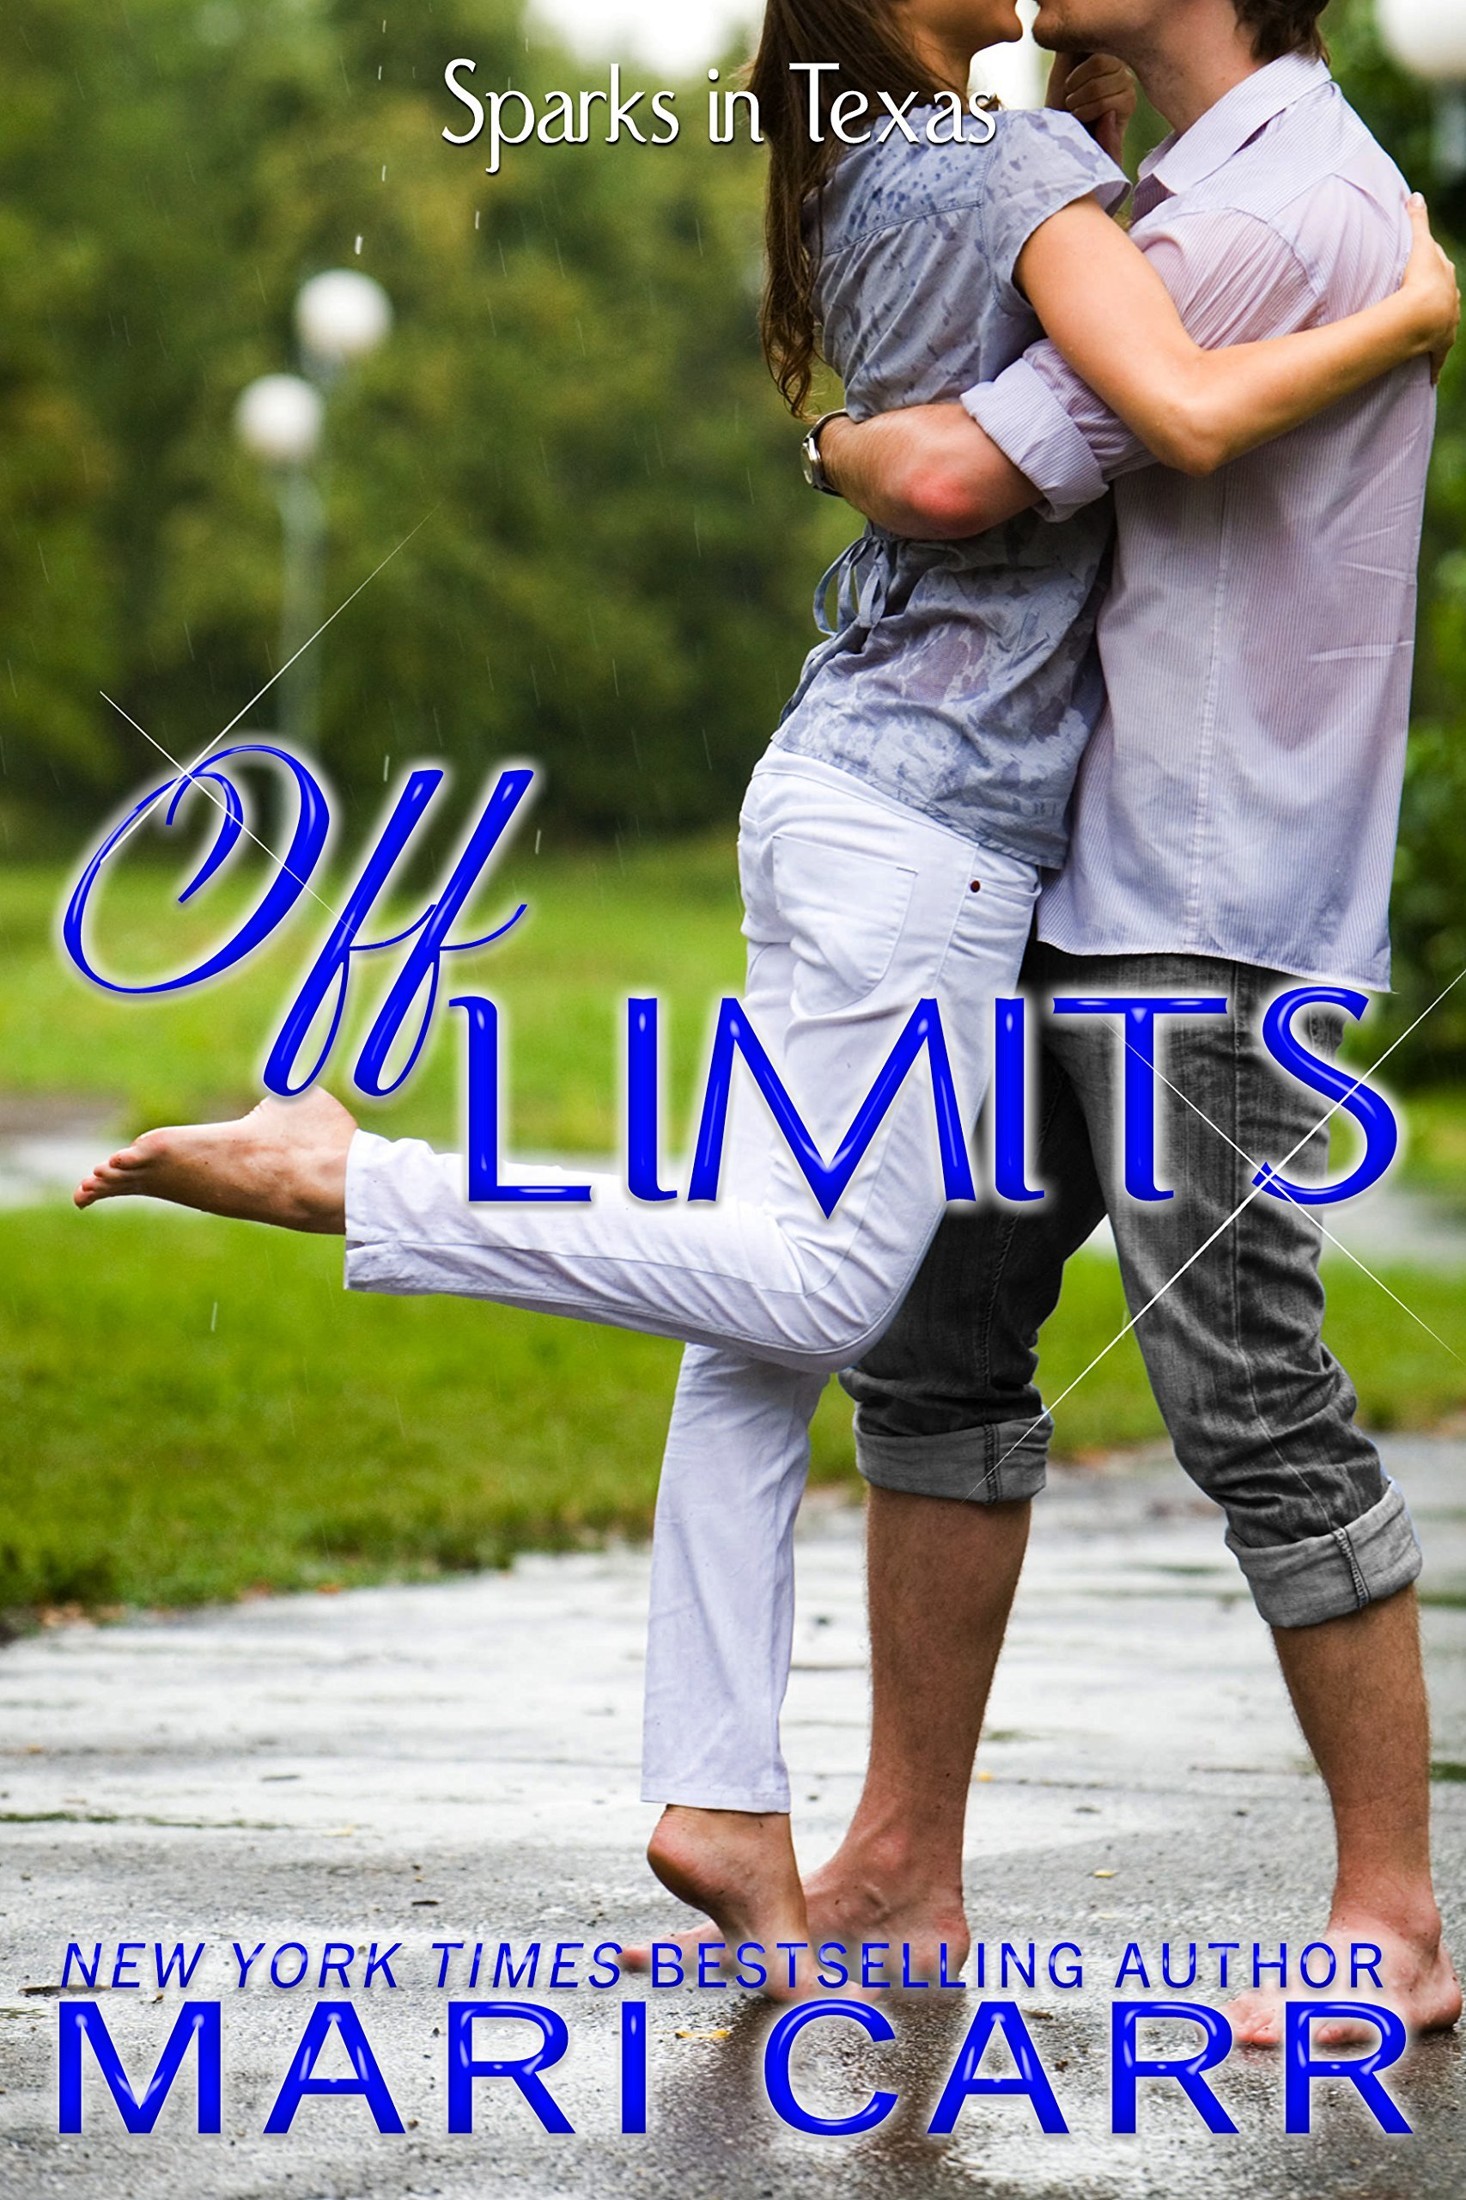 Off Limits (Sparks in Texas Book 4)